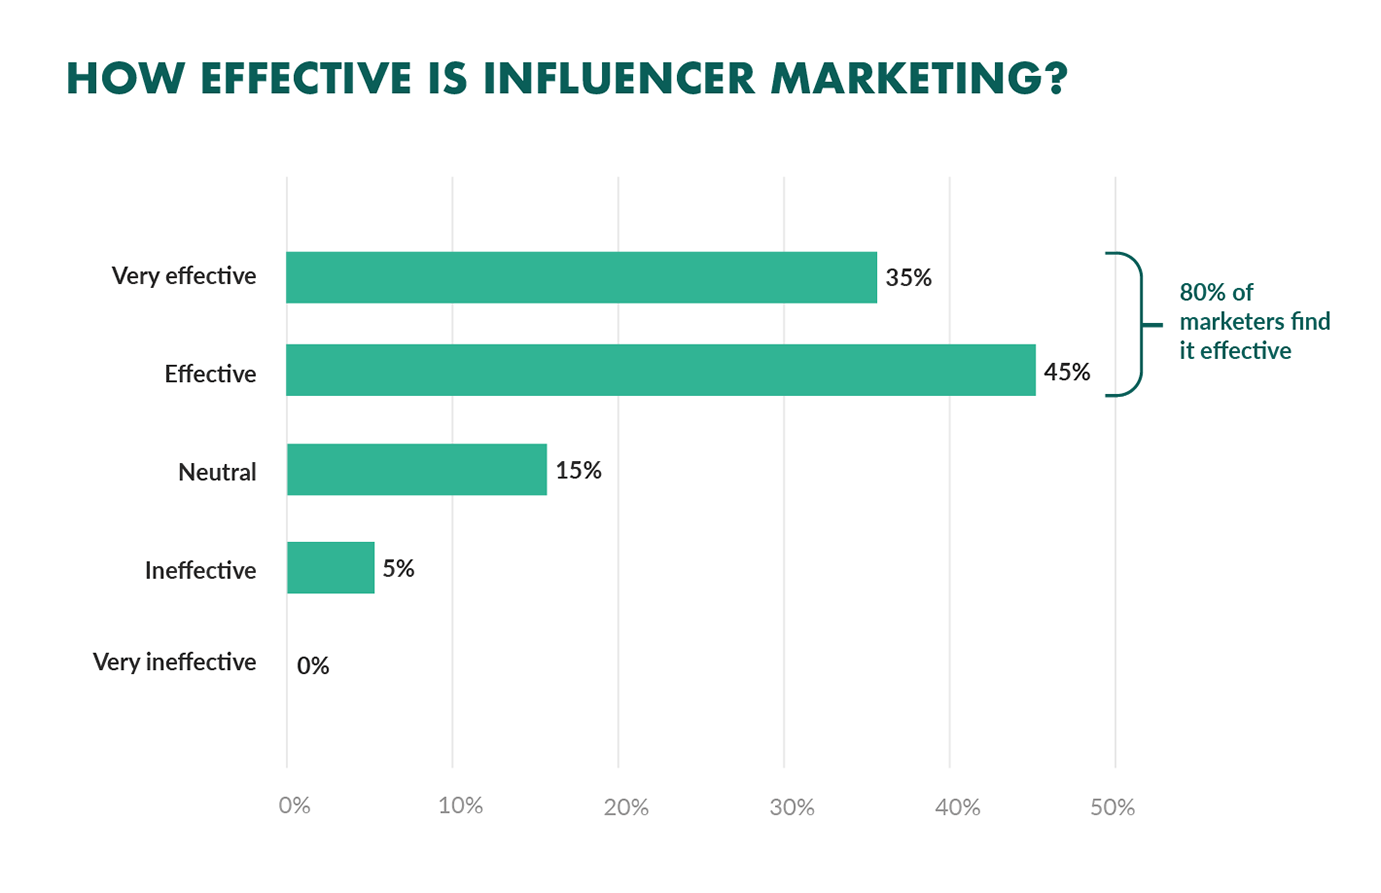 How effective is influencer marketing